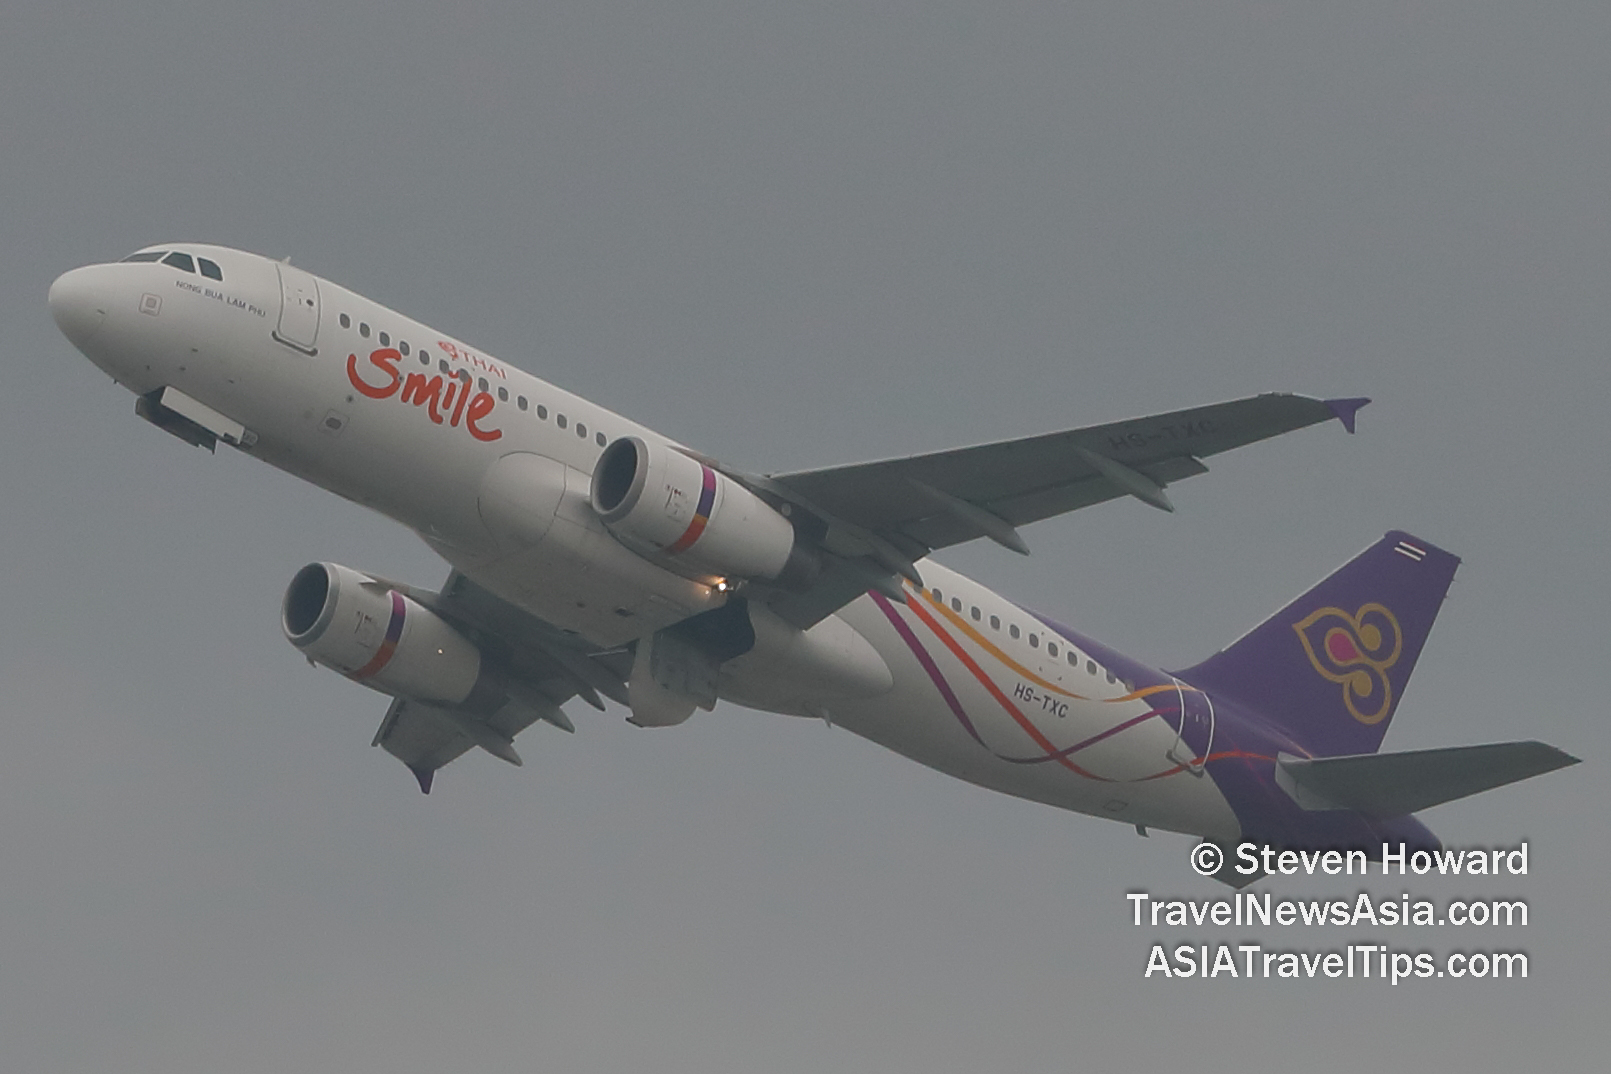 Thai Smile Airbus A320 reg: HS-TXC. Picture by Steven Howard of TravelNewsAsia.com Click to enlarge.